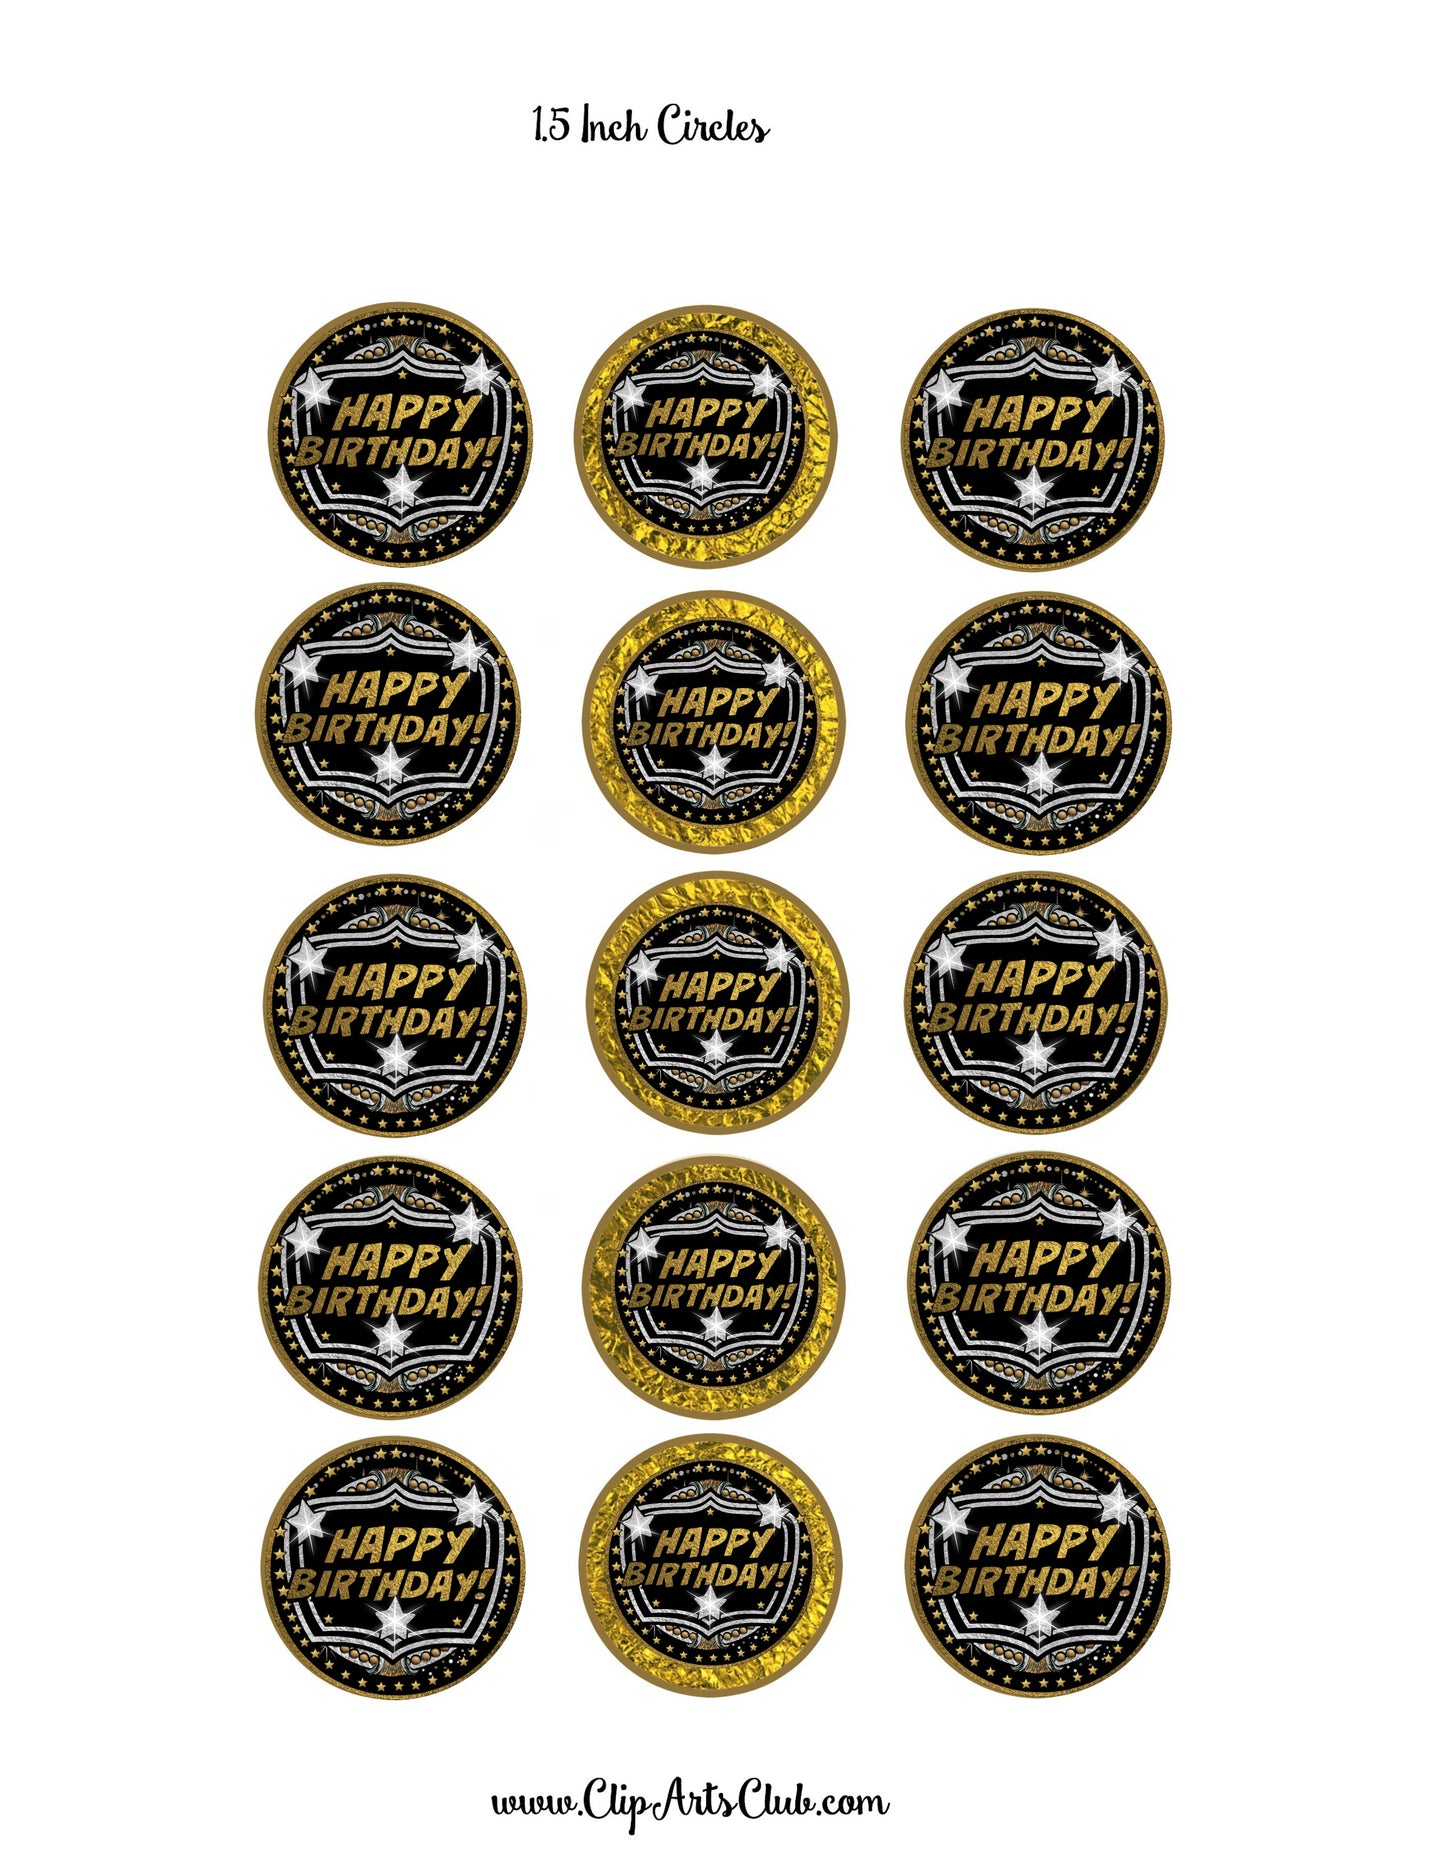 Happy Birthday Small Circles Labels, Tags, Stickers in Gold Foil Matches Birthday Bundle